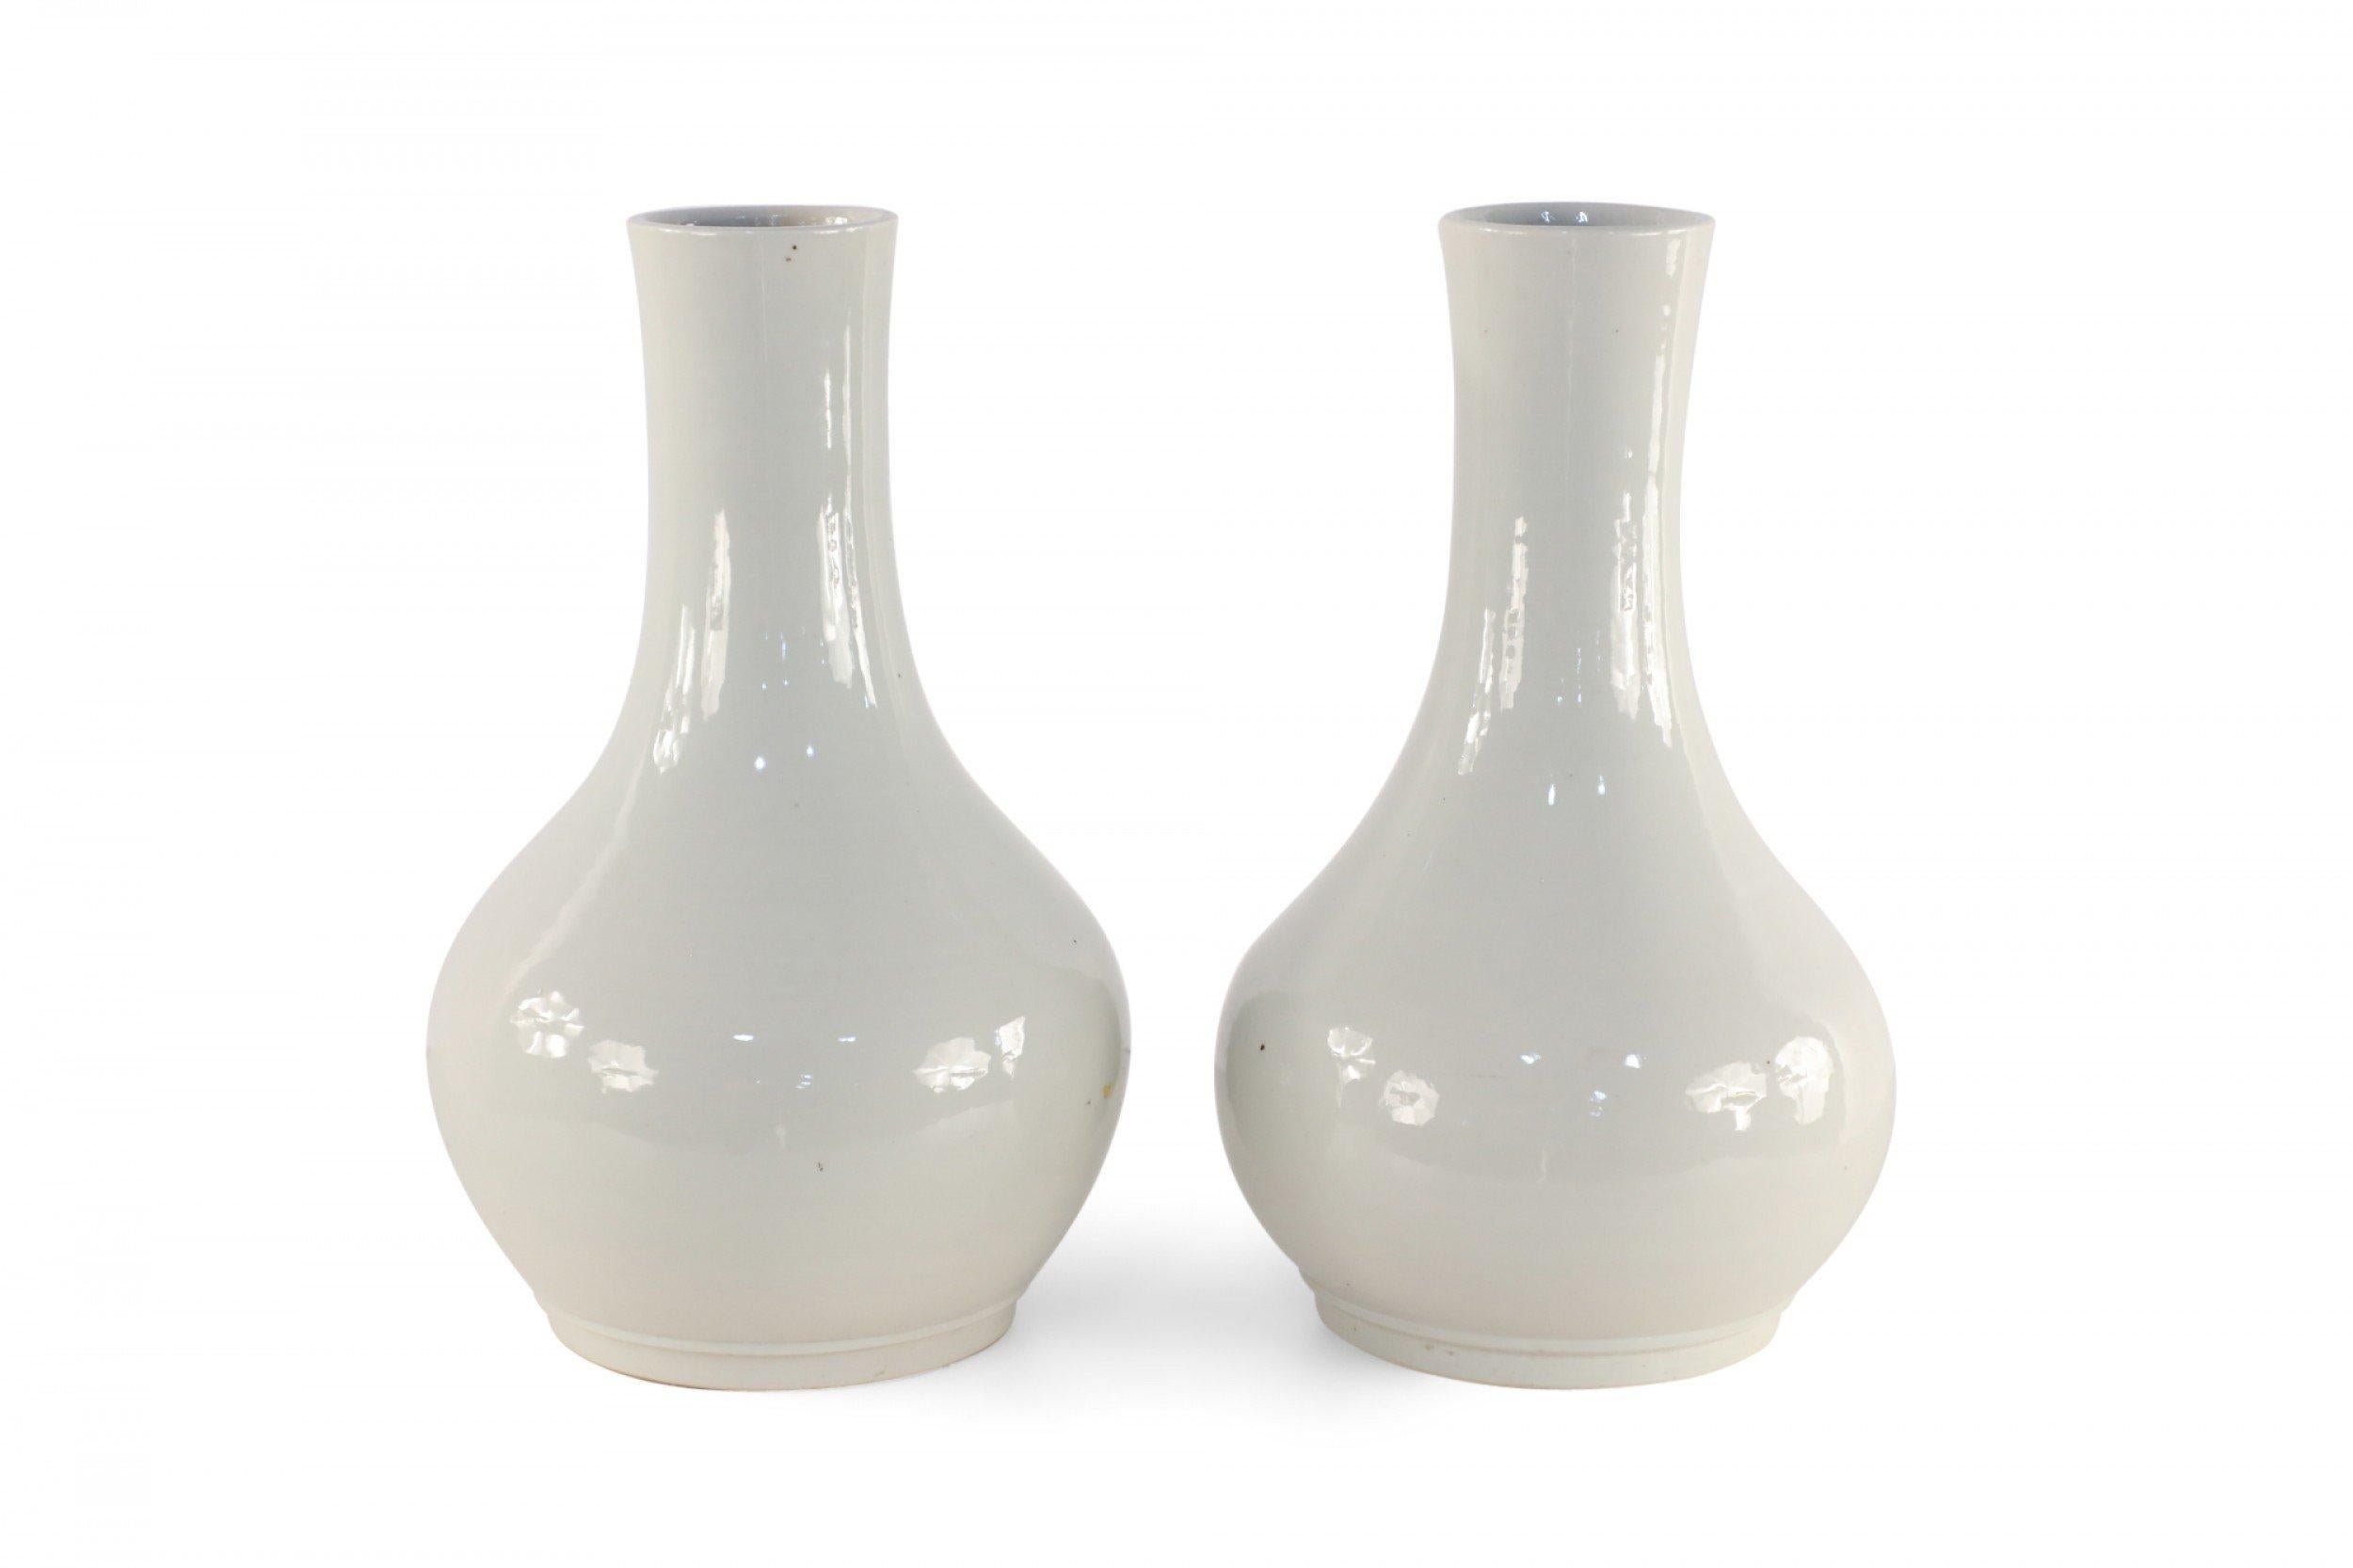 Pair of similar Chinese porcelain vases with globular forms in pale gray hues with glazed finishes (vases vary slightly in shape) (PRICED AS PAIR).
 